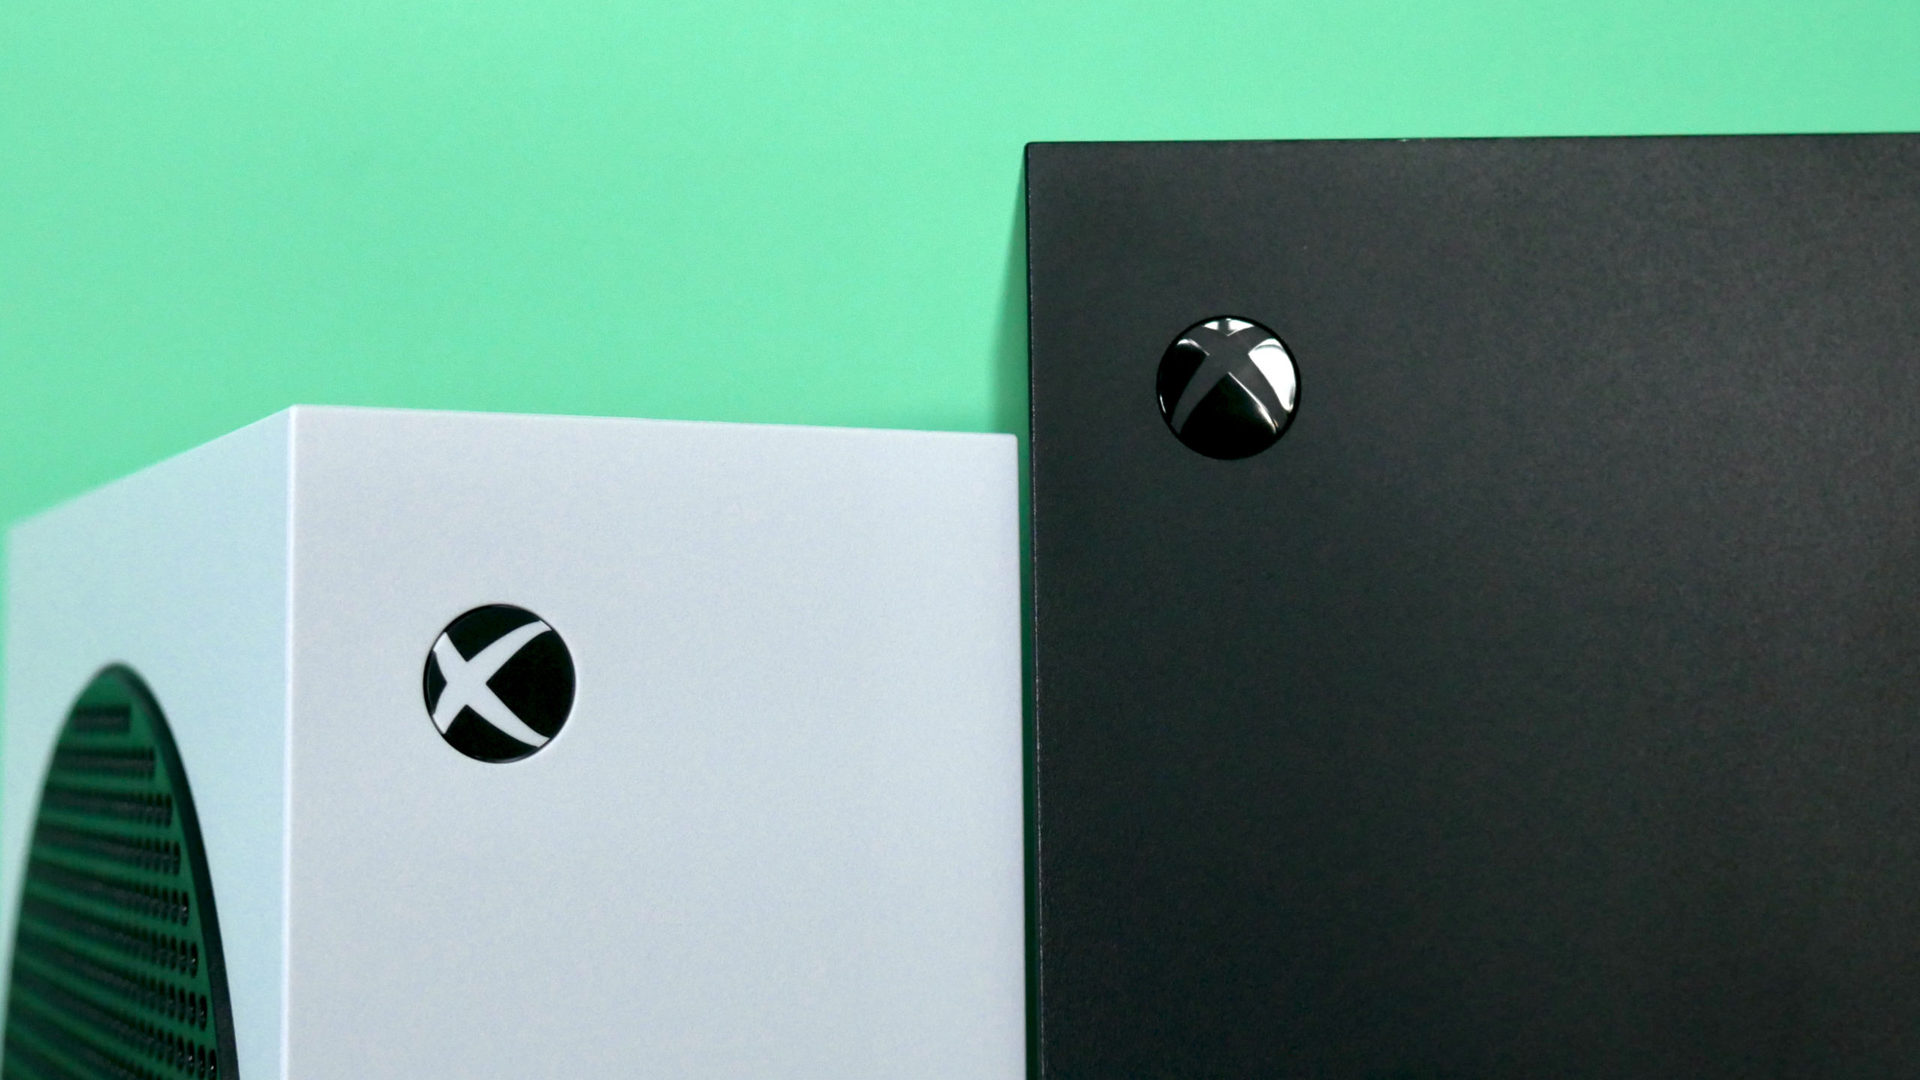 Choosing the Right Xbox: Series X or Series S